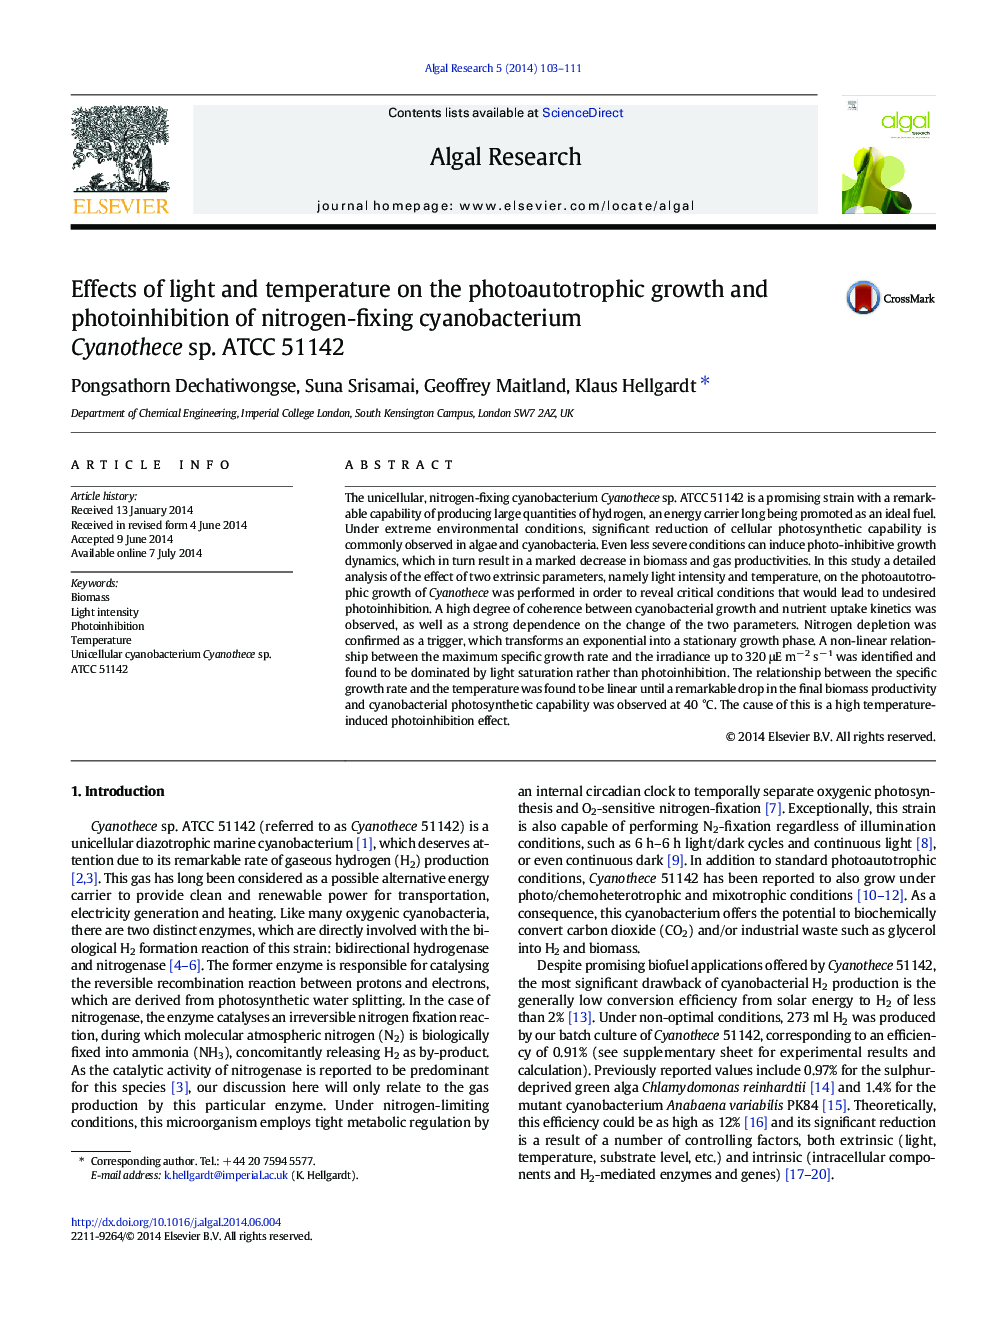 Effects of light and temperature on the photoautotrophic growth and photoinhibition of nitrogen-fixing cyanobacterium Cyanothece sp. ATCC 51142